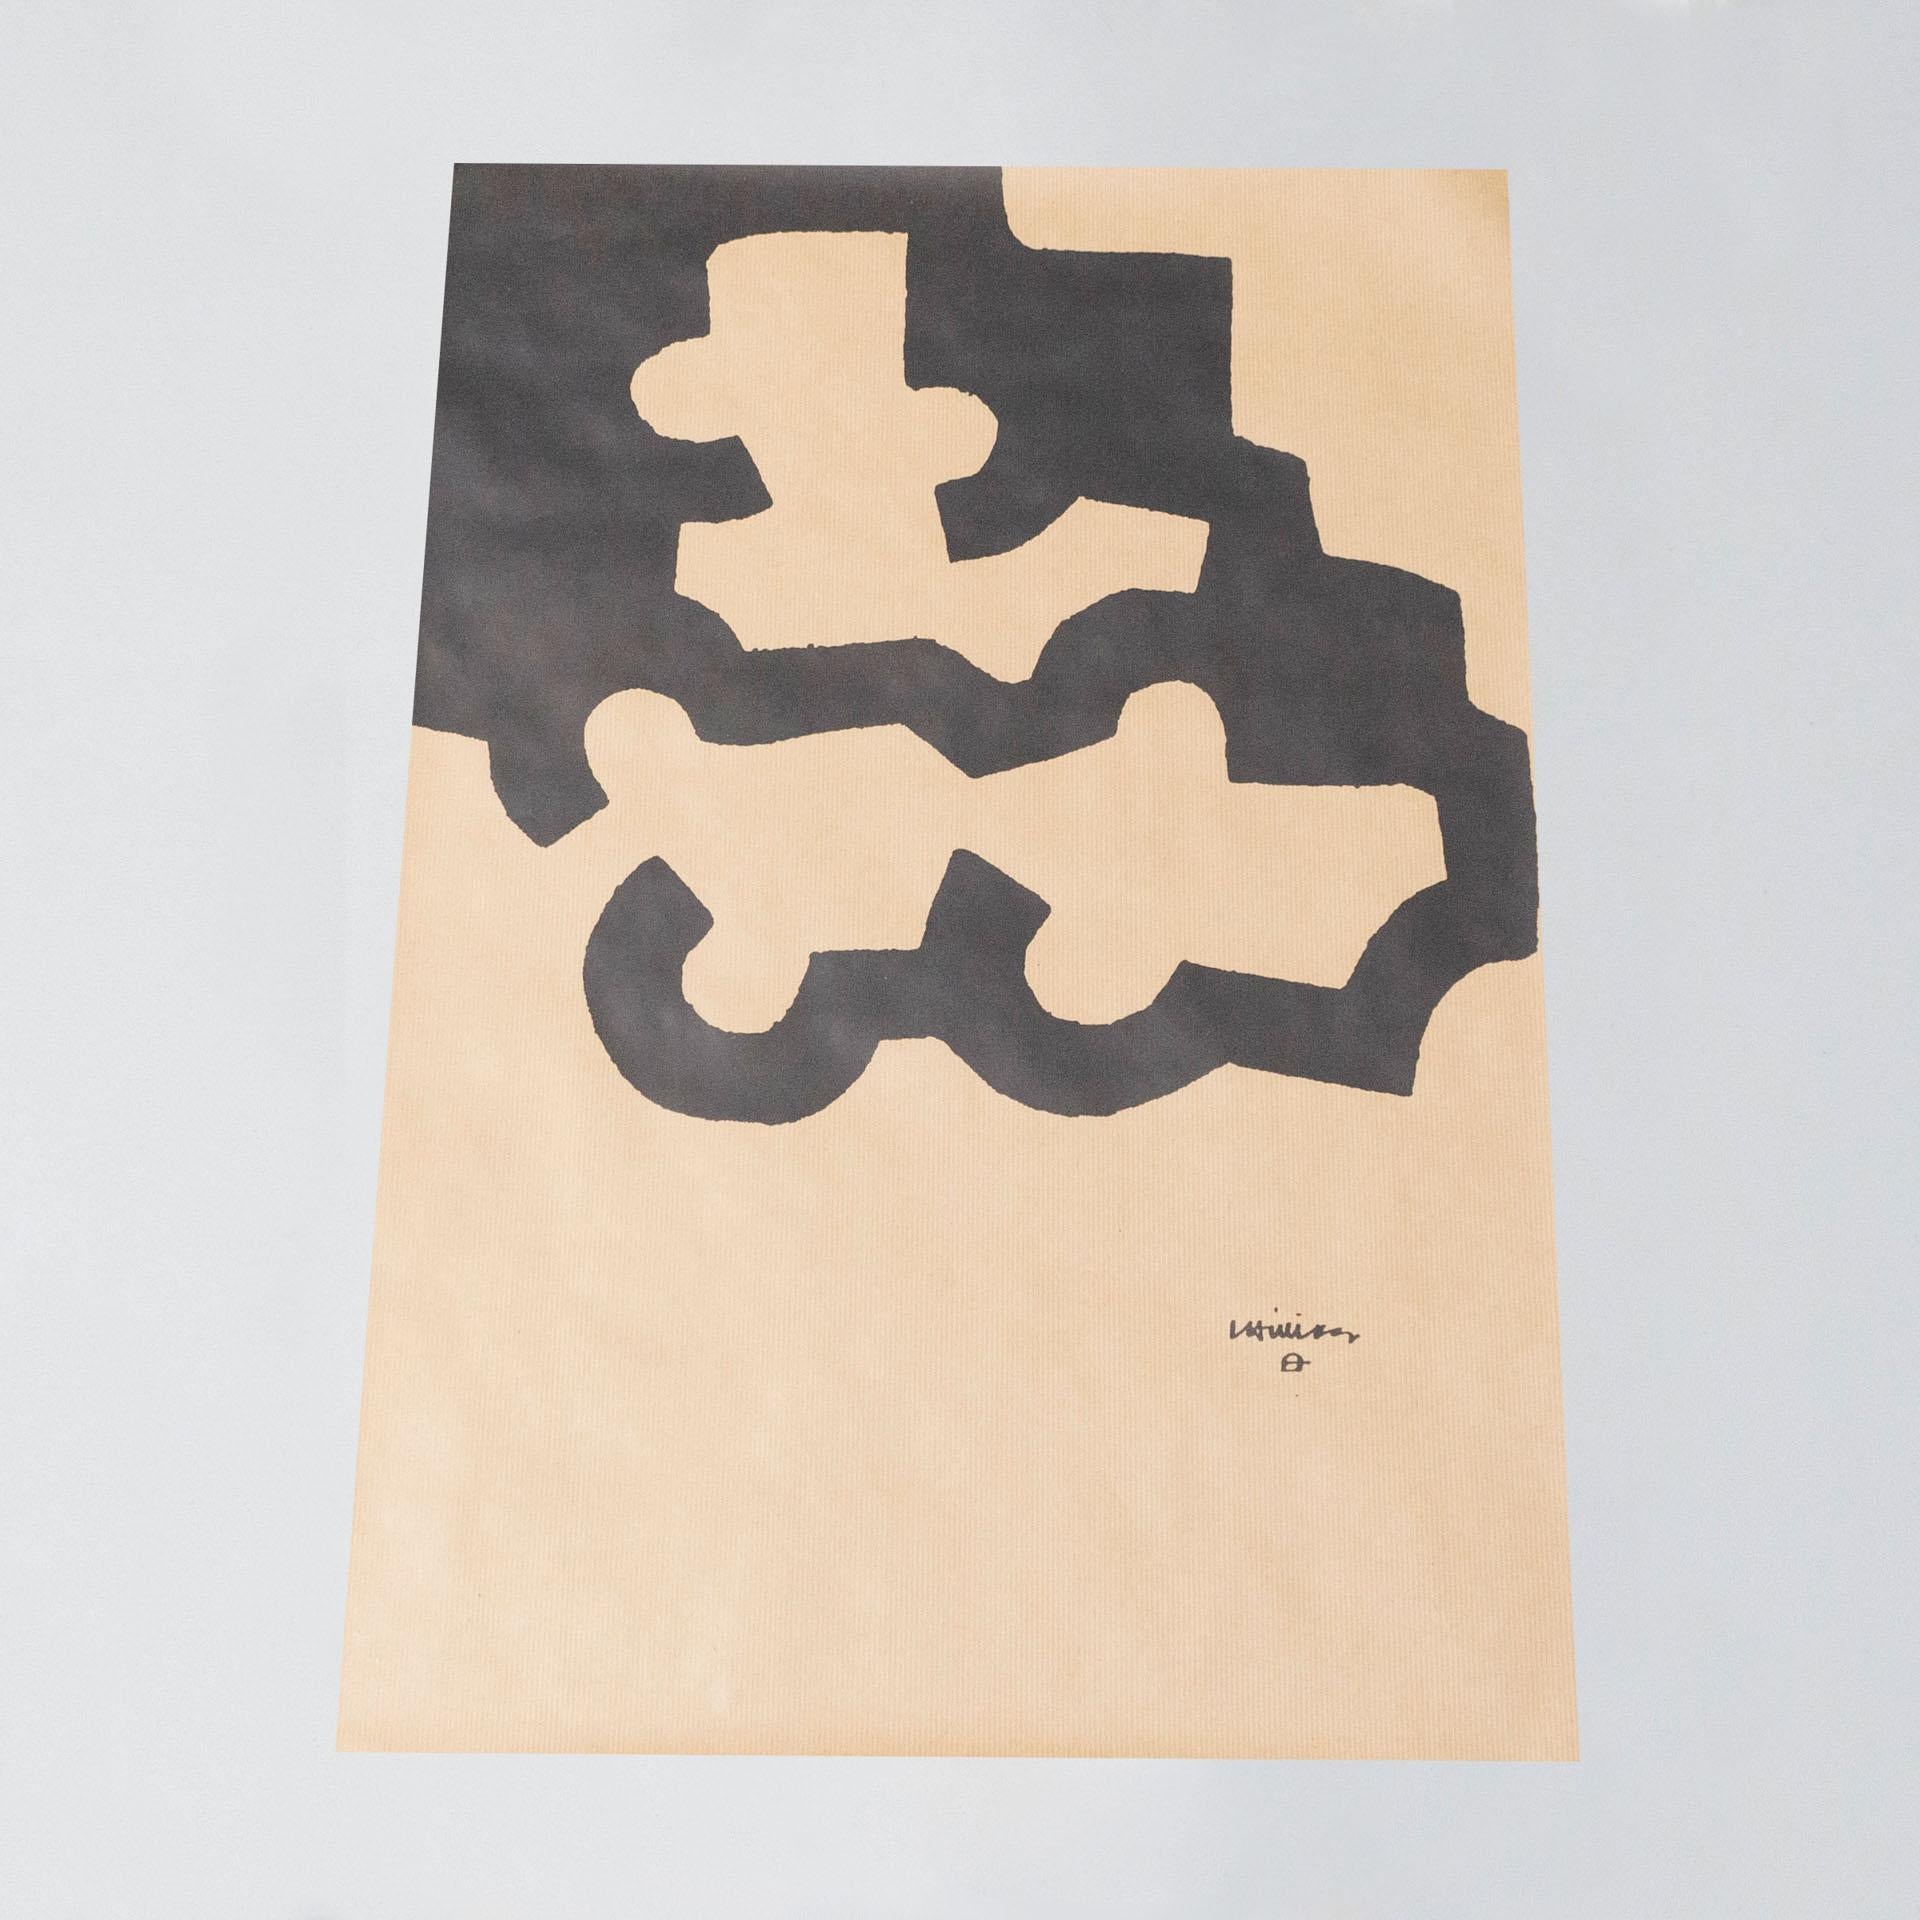 Eduardo Chillida print.
Spain, circa 1990.

Introduce a touch of modern Spanish artistry to your space with this striking Eduardo Chillida print, circa 1990. The renowned artist's bold, abstract style and masterful use of lines and shapes make this